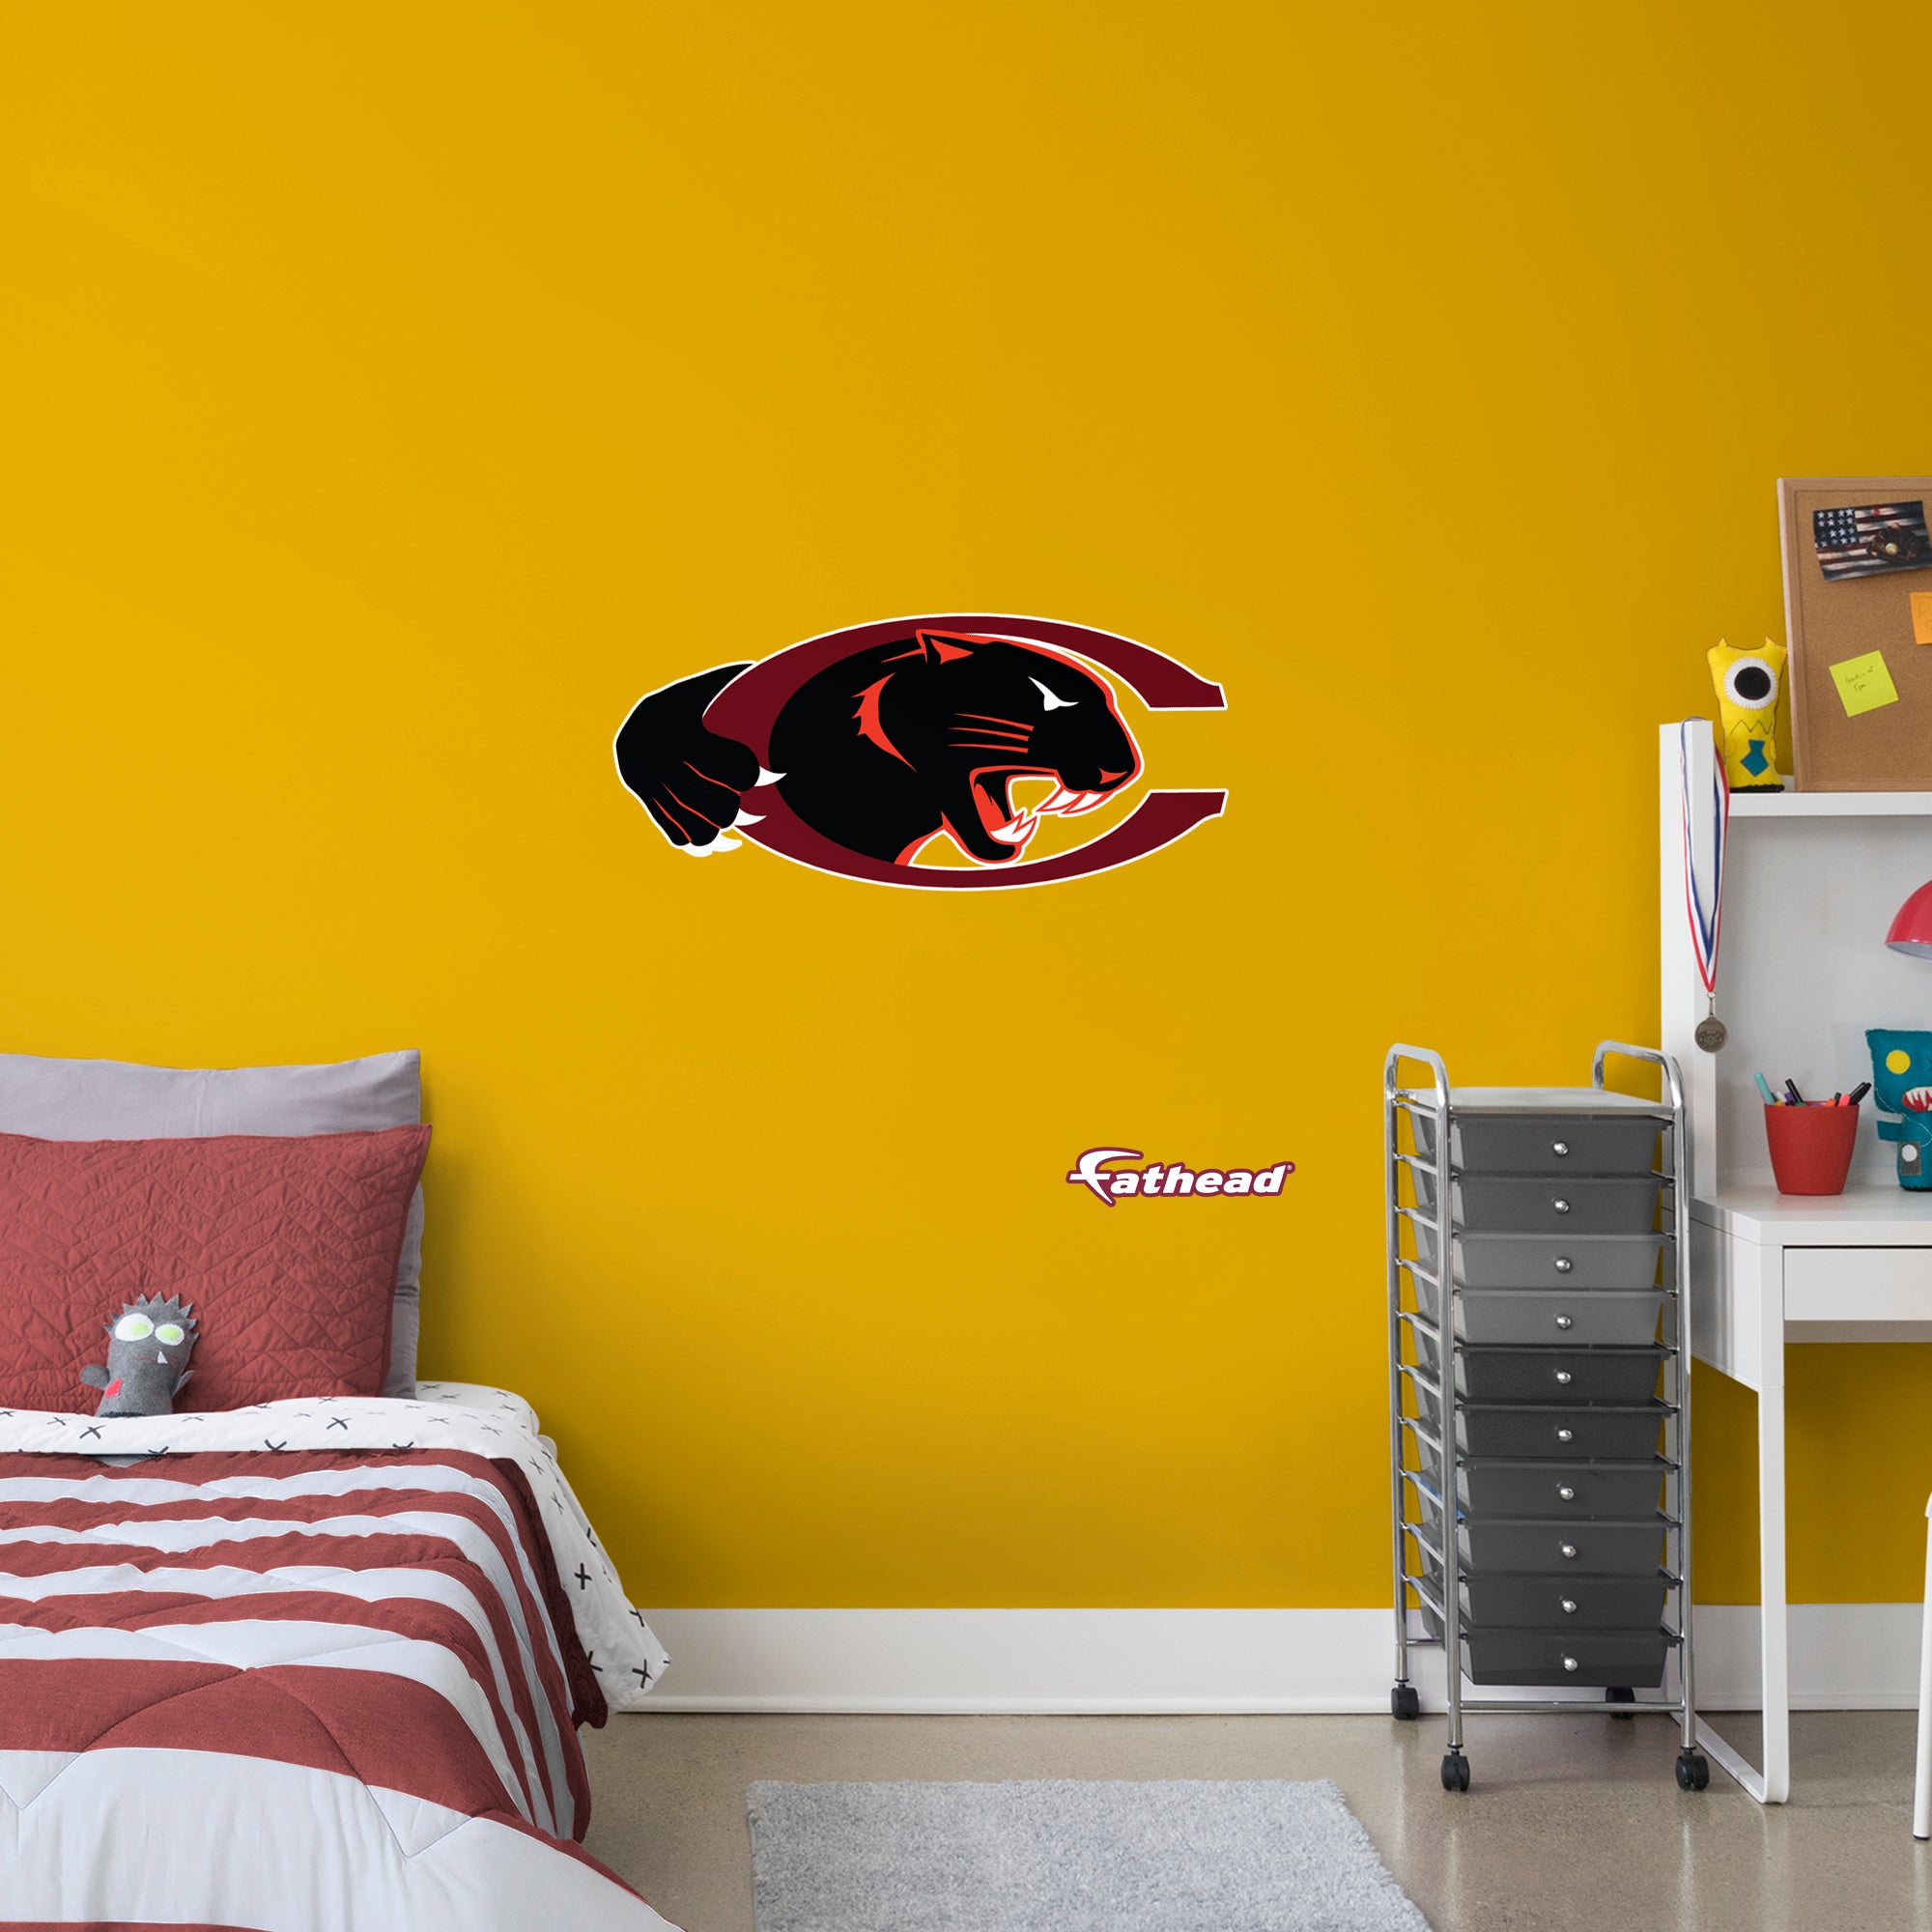 Claflin University 2020 Logo - Officially Licensed NCAA Removable Wall Decal XL by Fathead | Vinyl